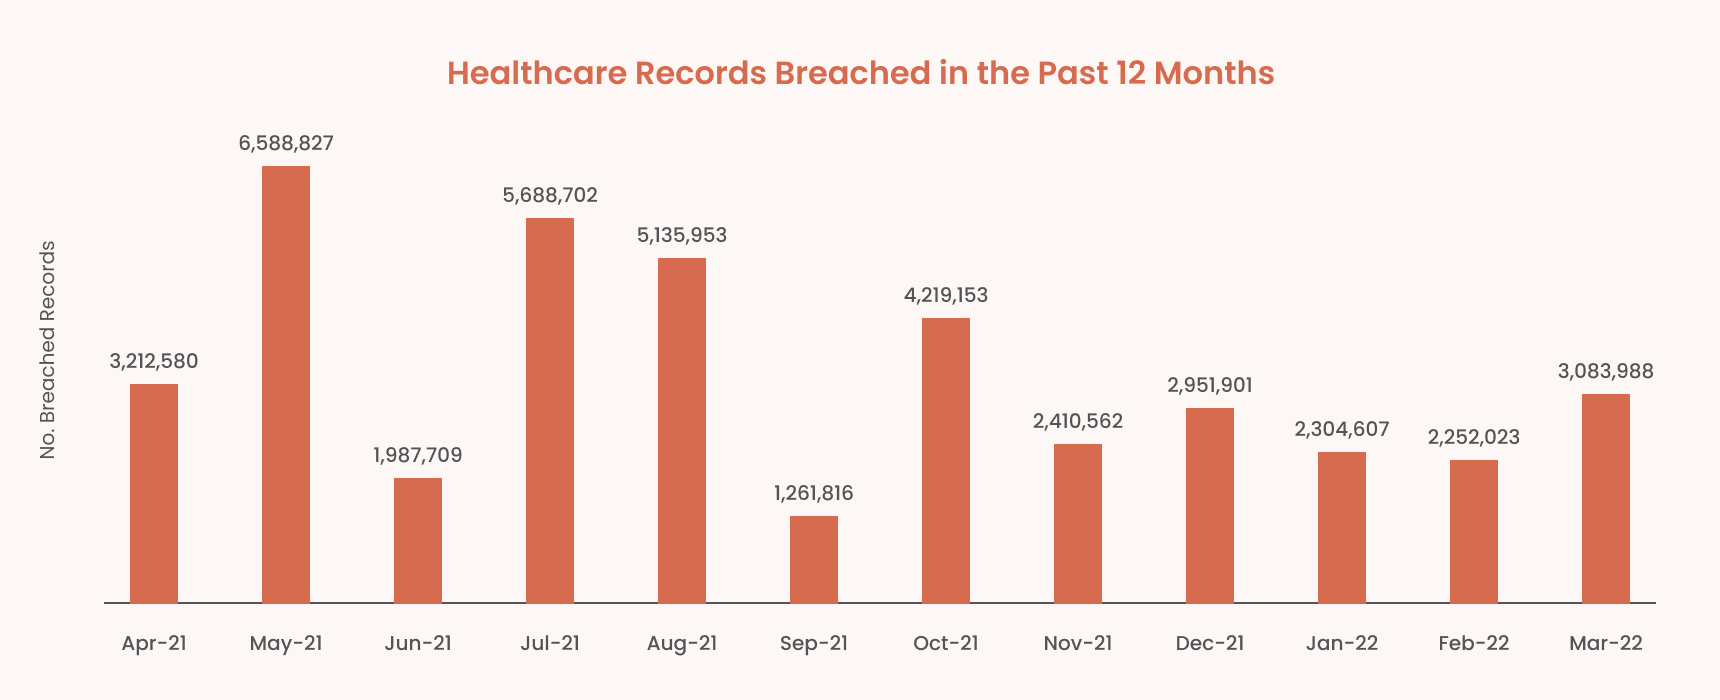 Healthcare records breached